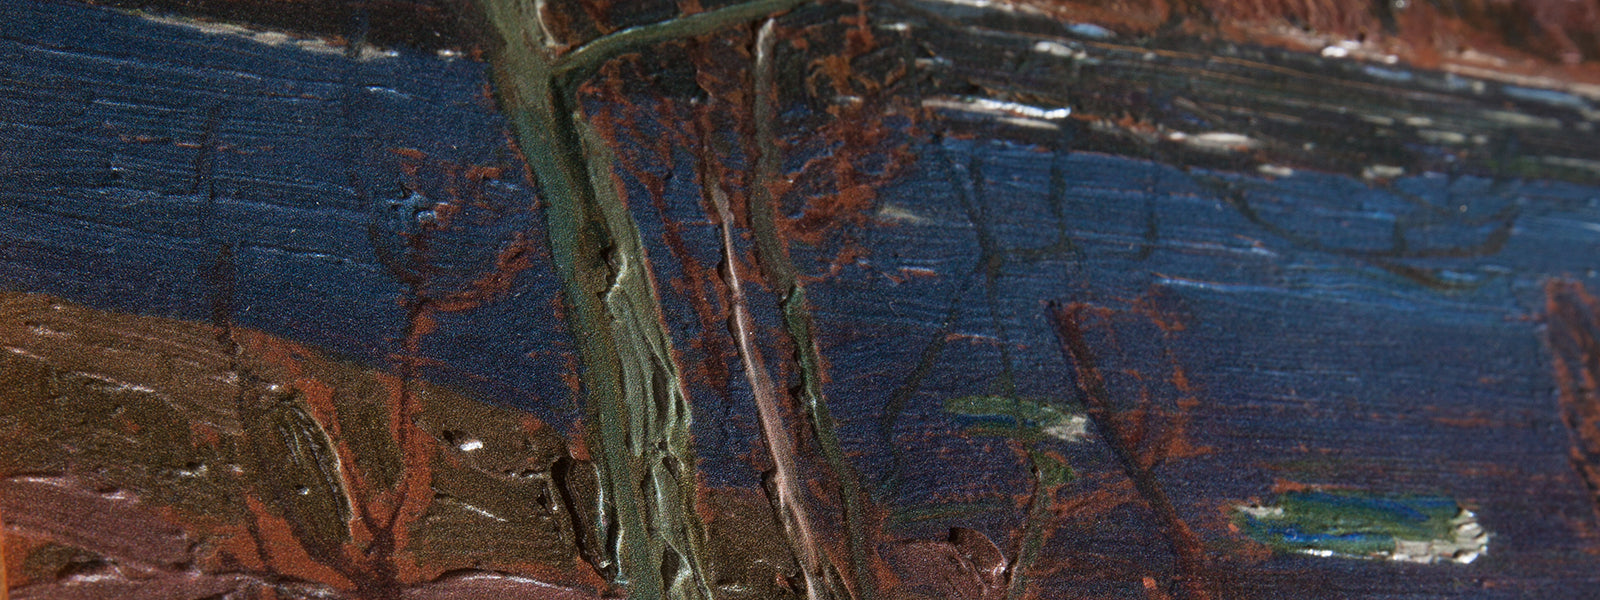 Opening of the Rivers, by Tom Thomson Painting Close Up